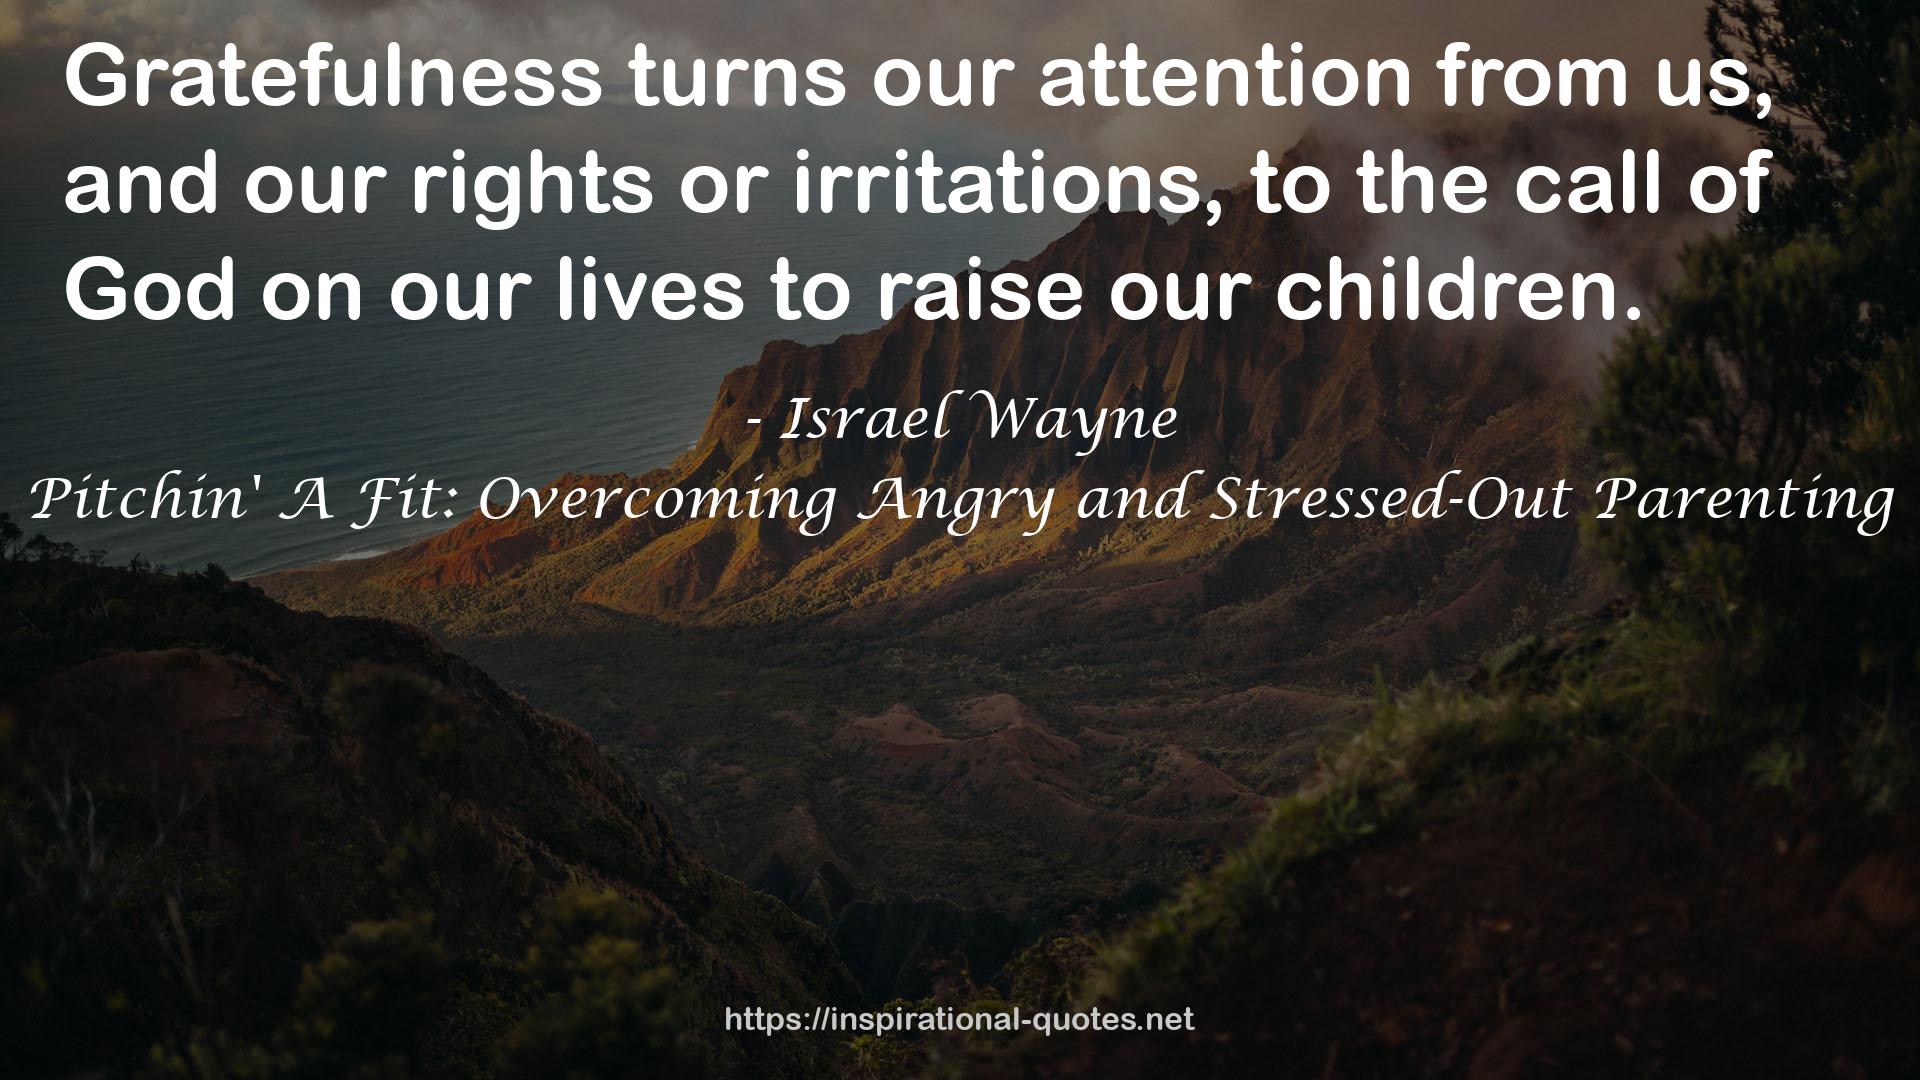 Pitchin' A Fit: Overcoming Angry and Stressed-Out Parenting QUOTES